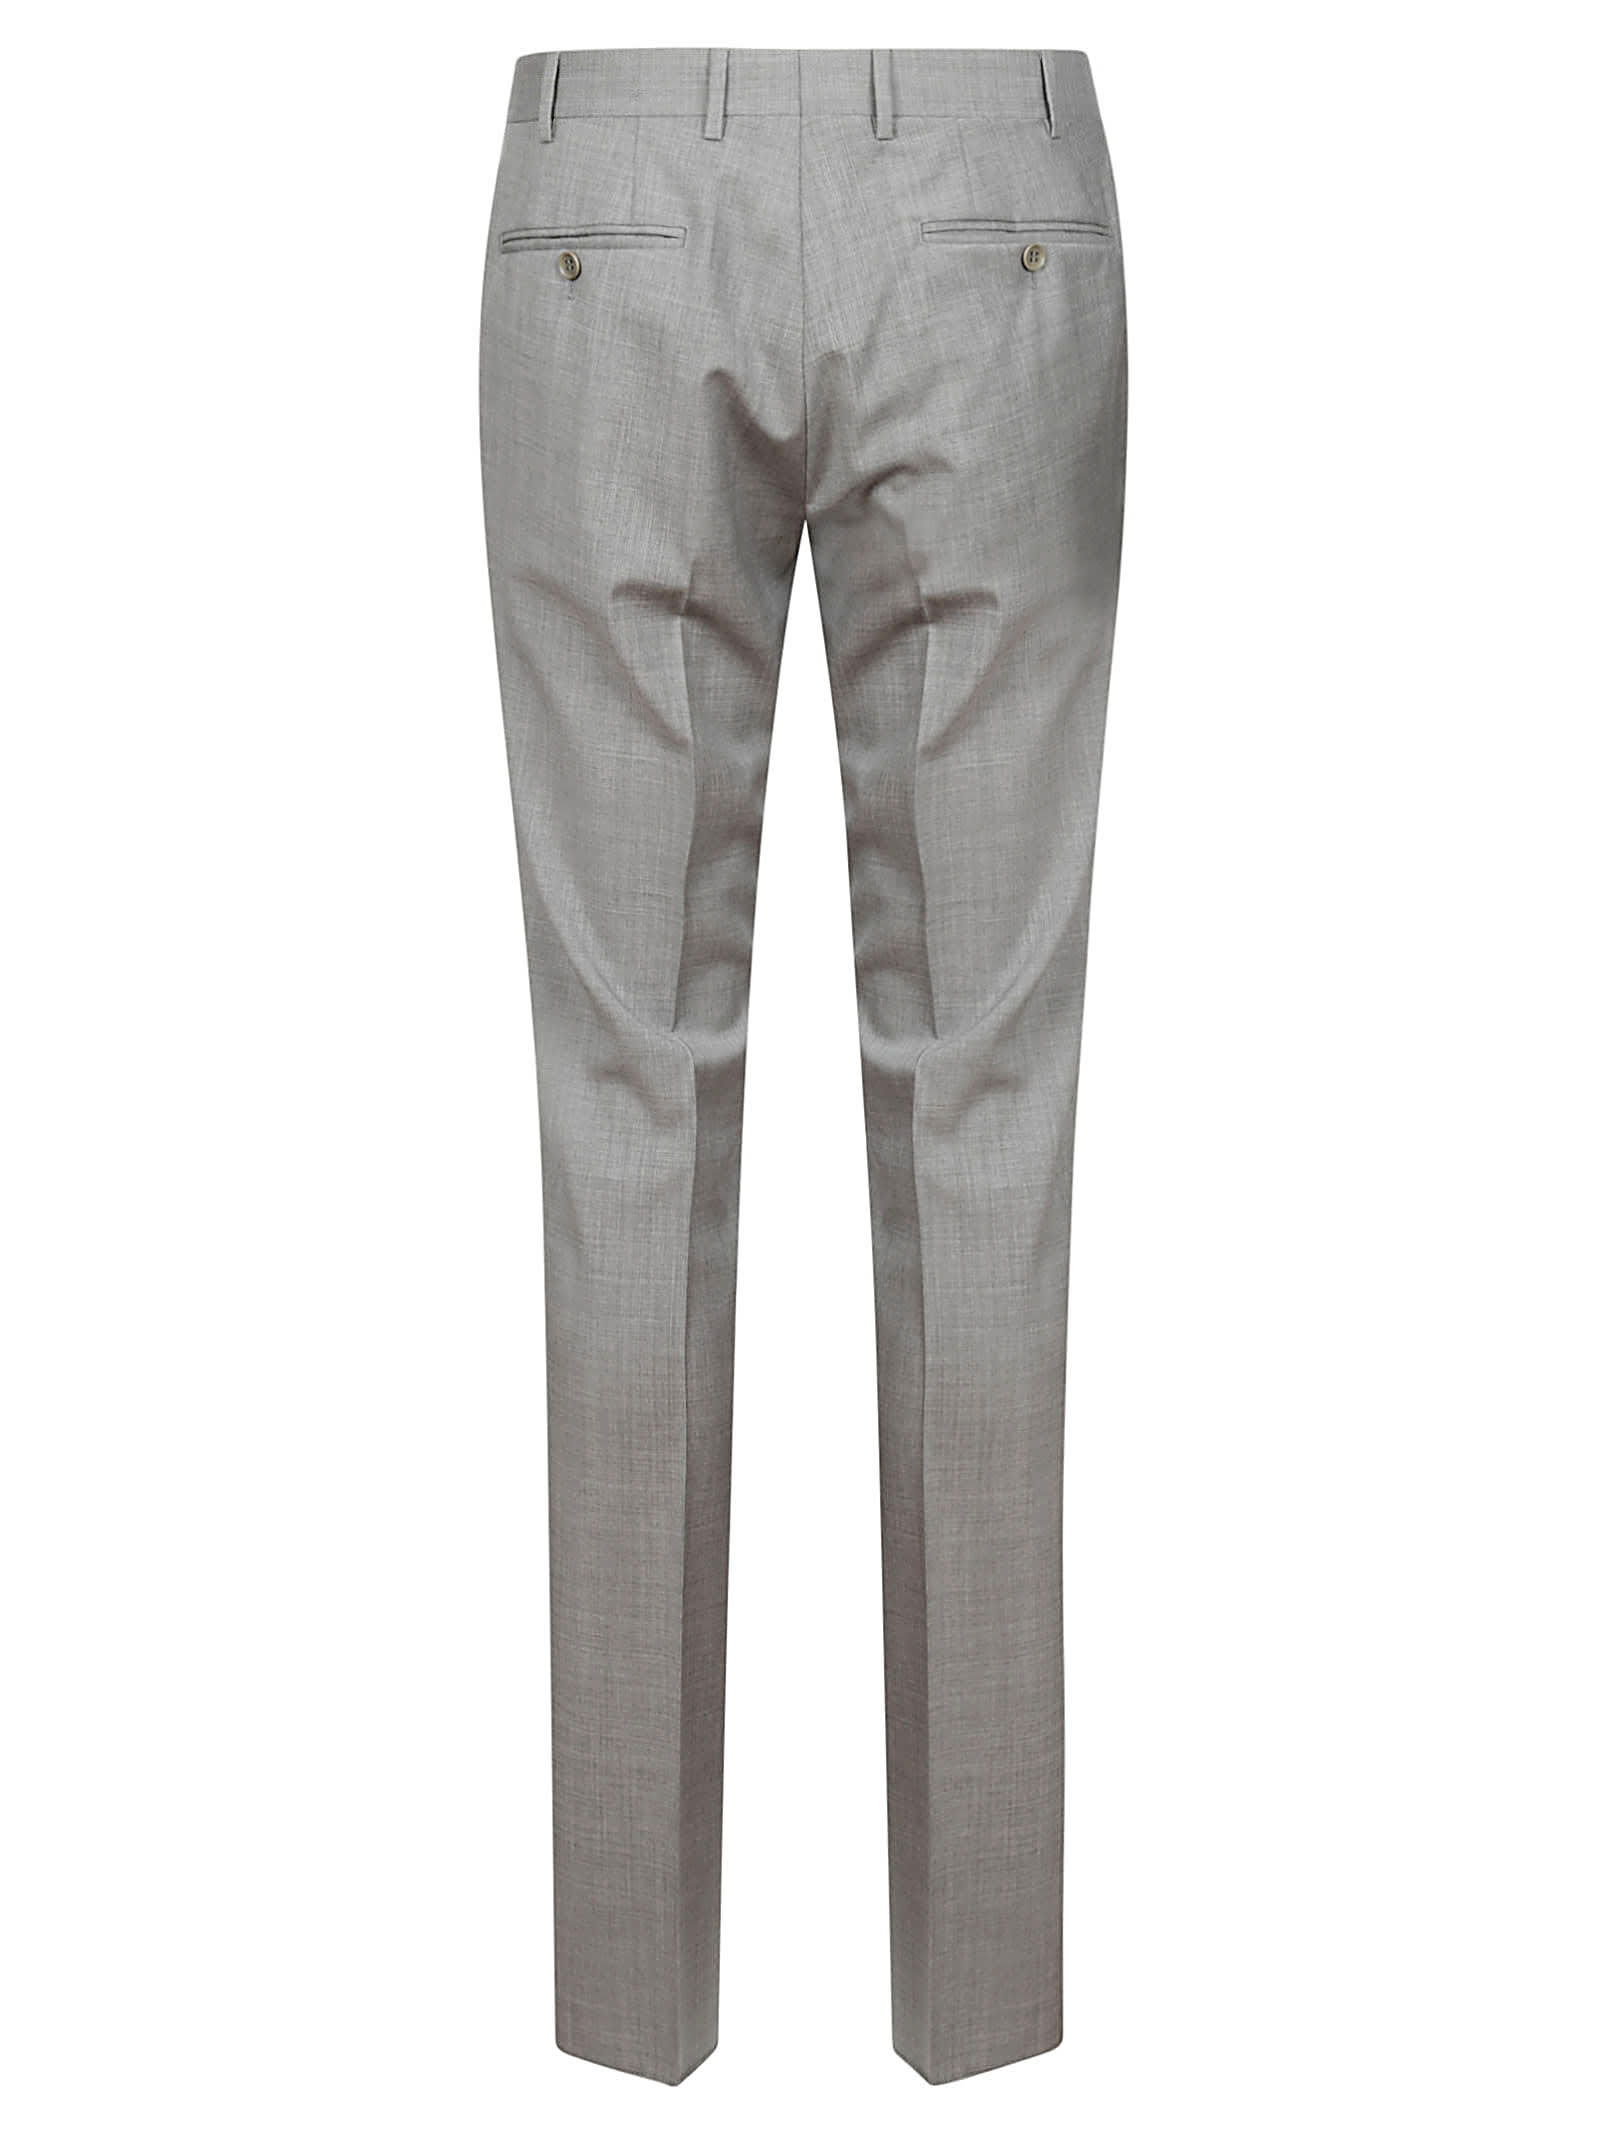 Shop Canali Suit In Grey